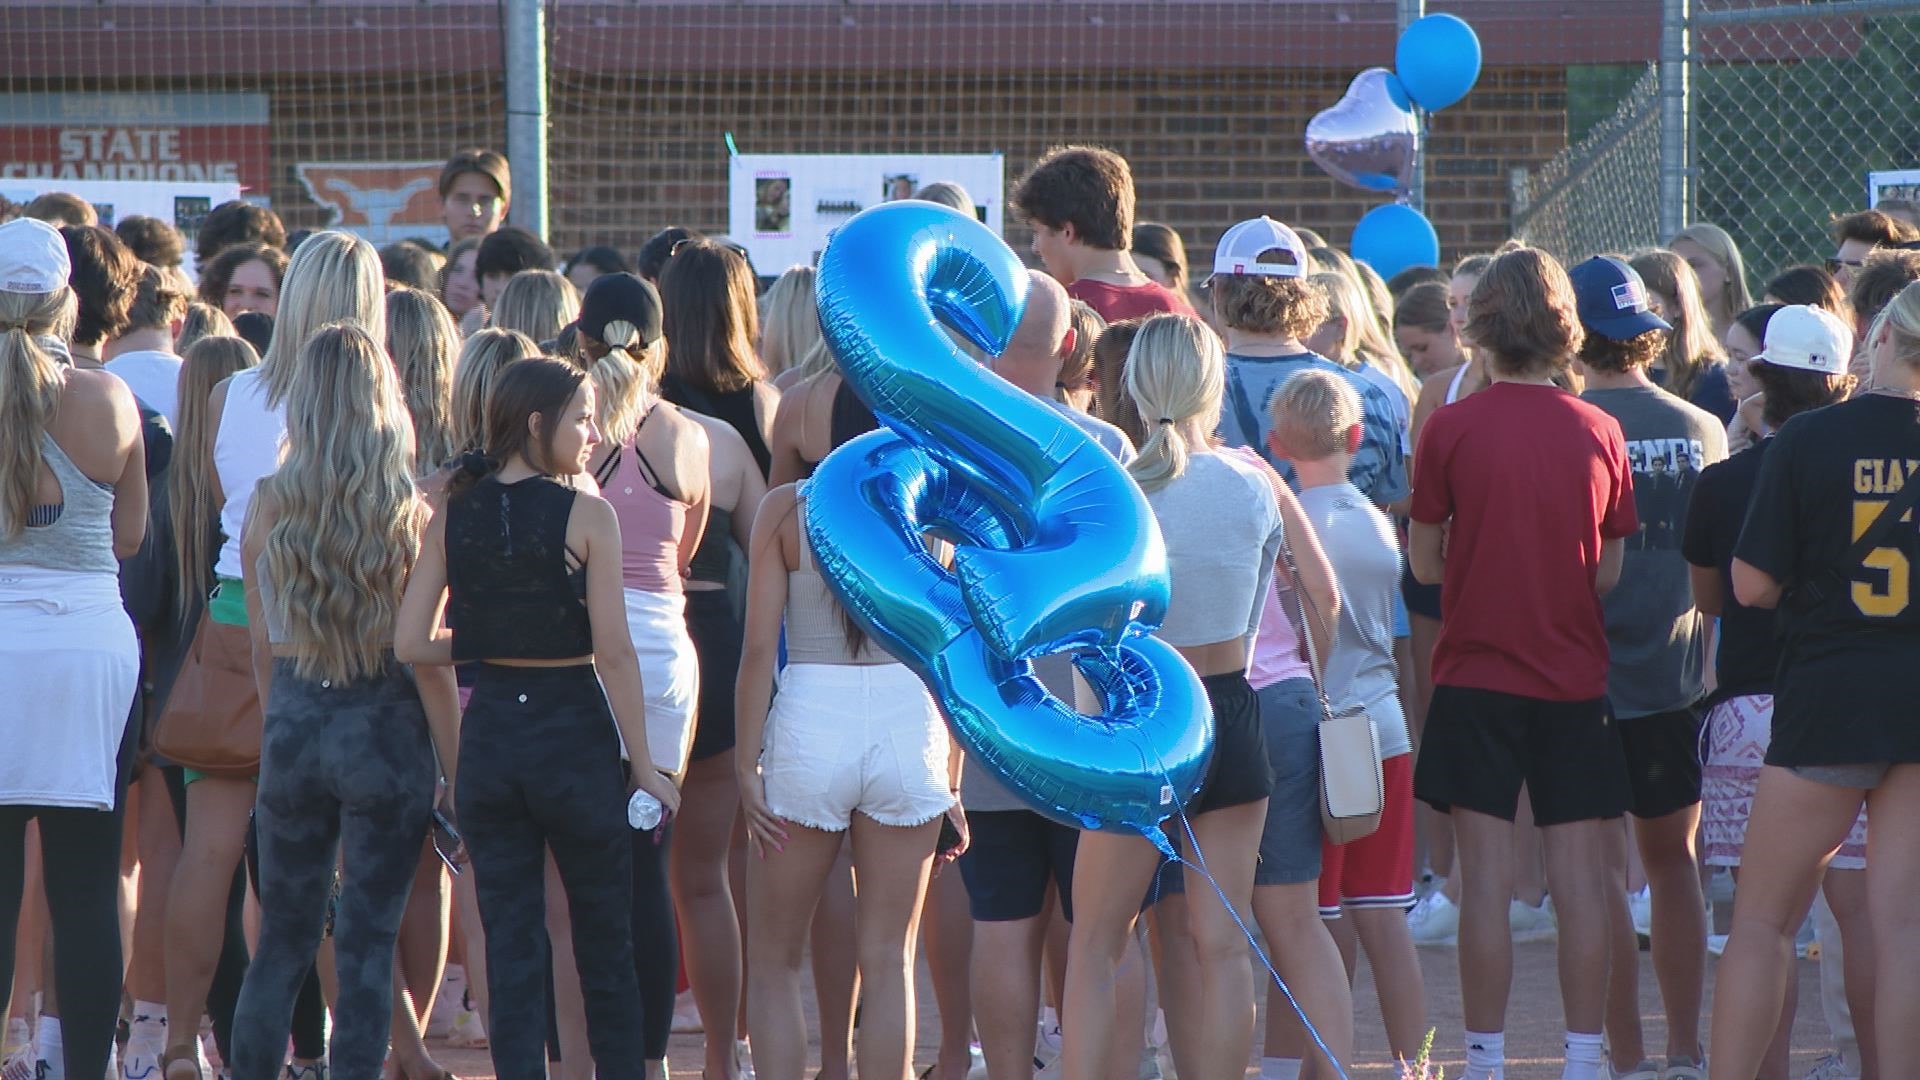 A few hundred people remembered 15-year-old Kendall Johnson on the school's softball field where she once played.